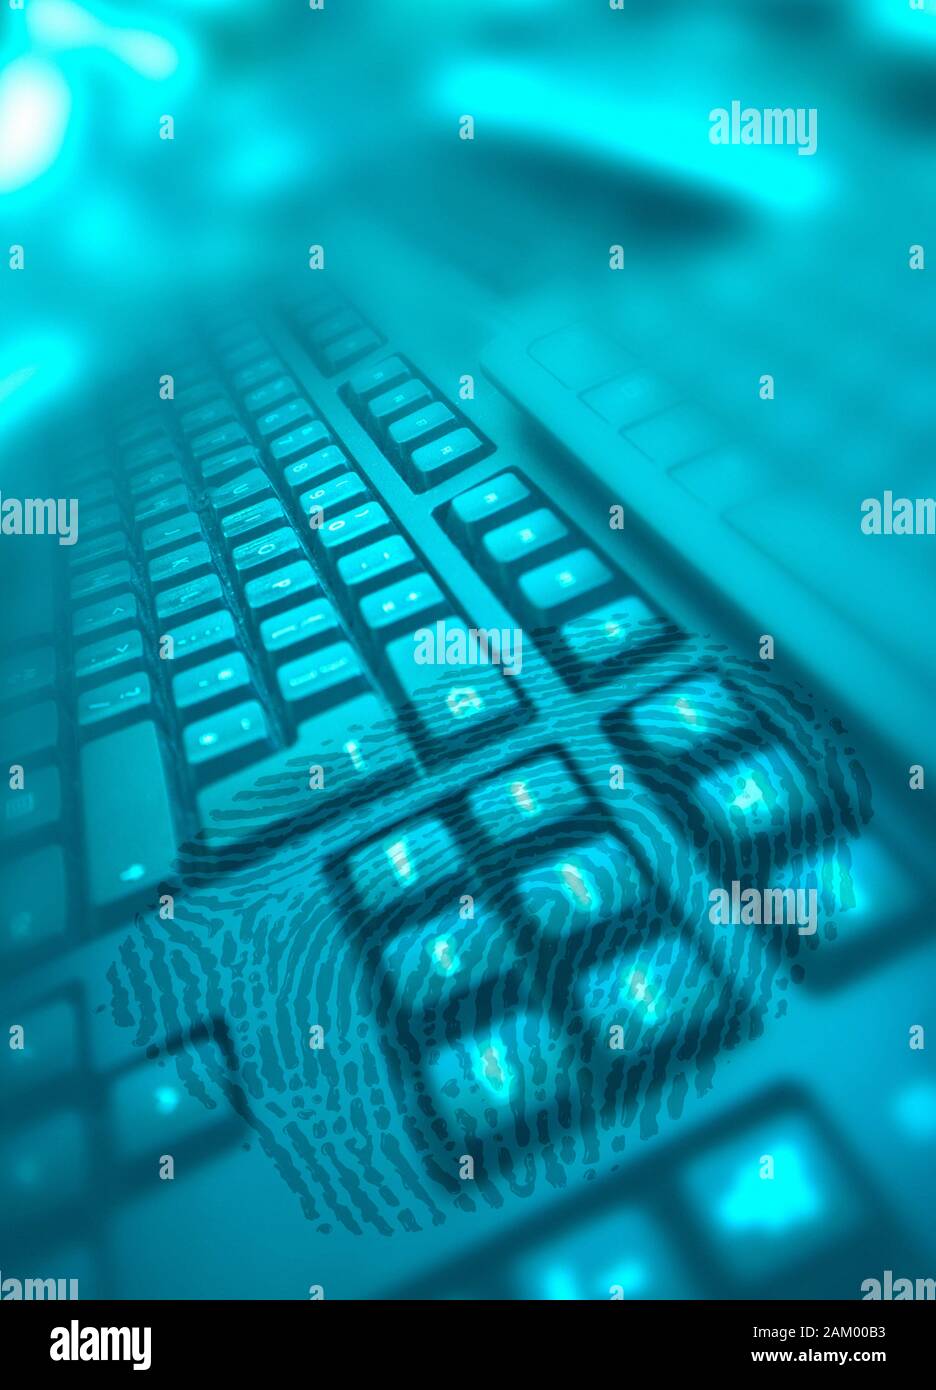 Computer keyboard and finger print, illustration Stock Photo